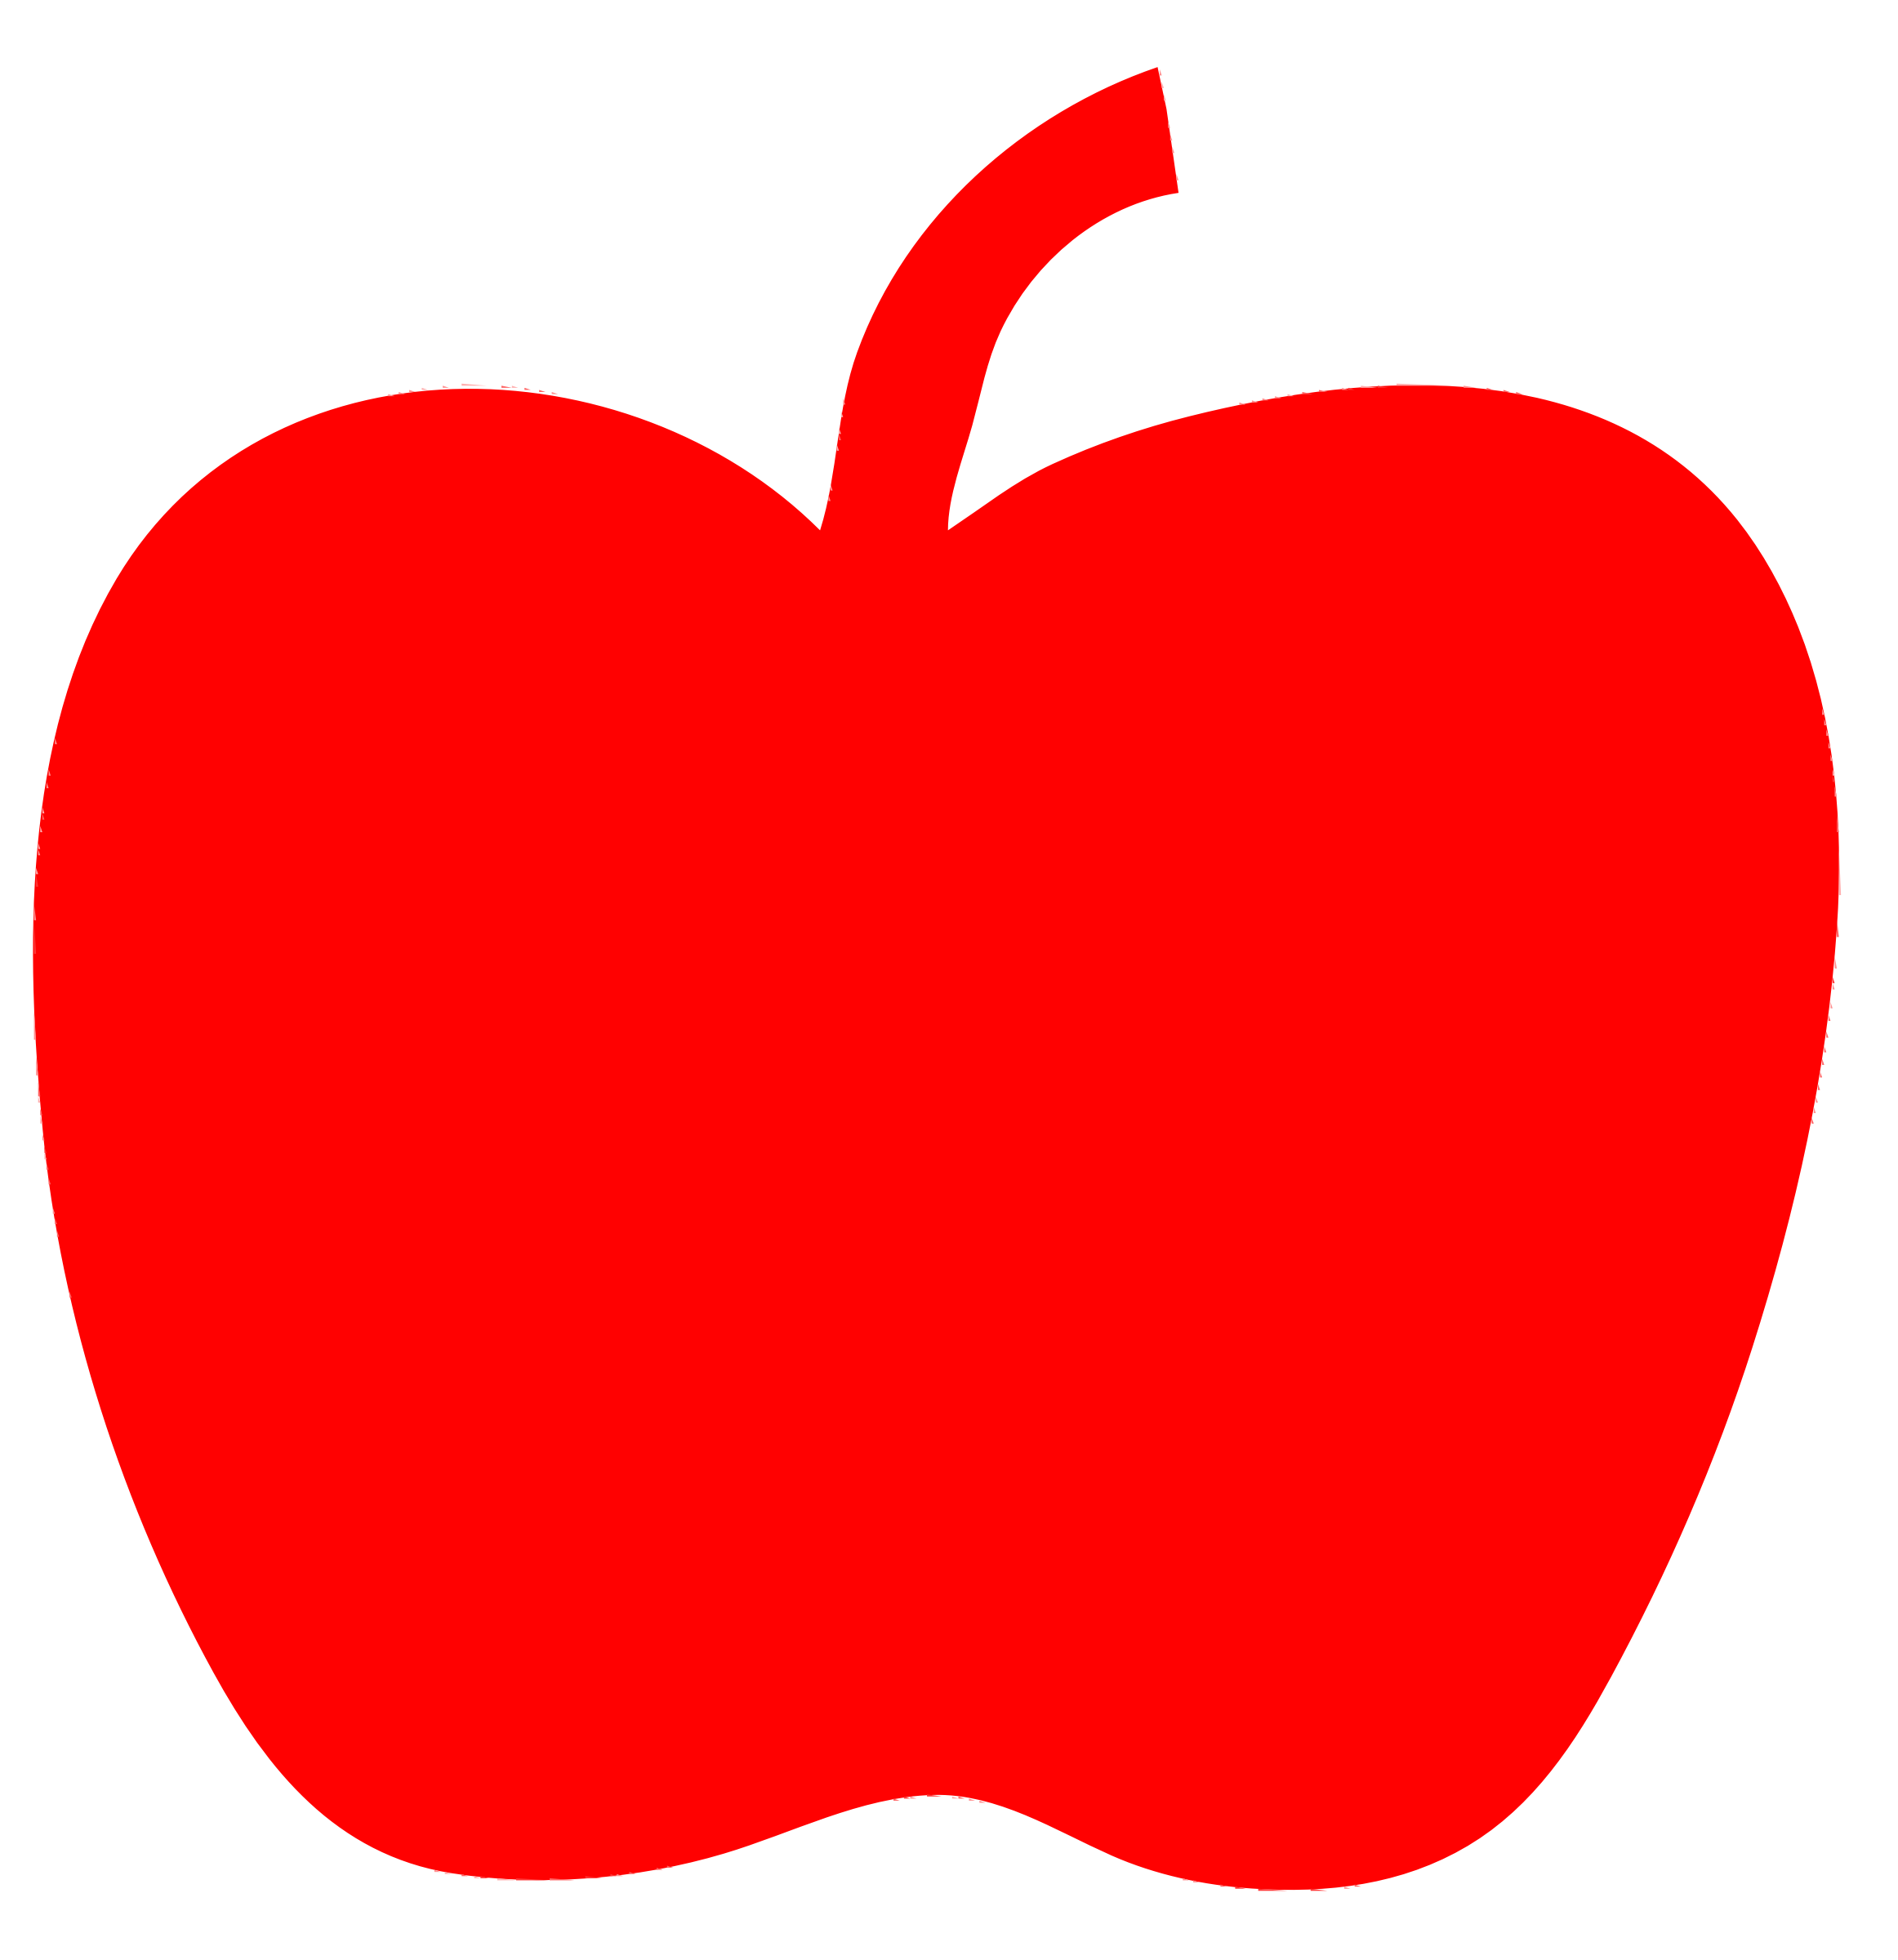 Clipart red apple 2 - Red Apple Clipart